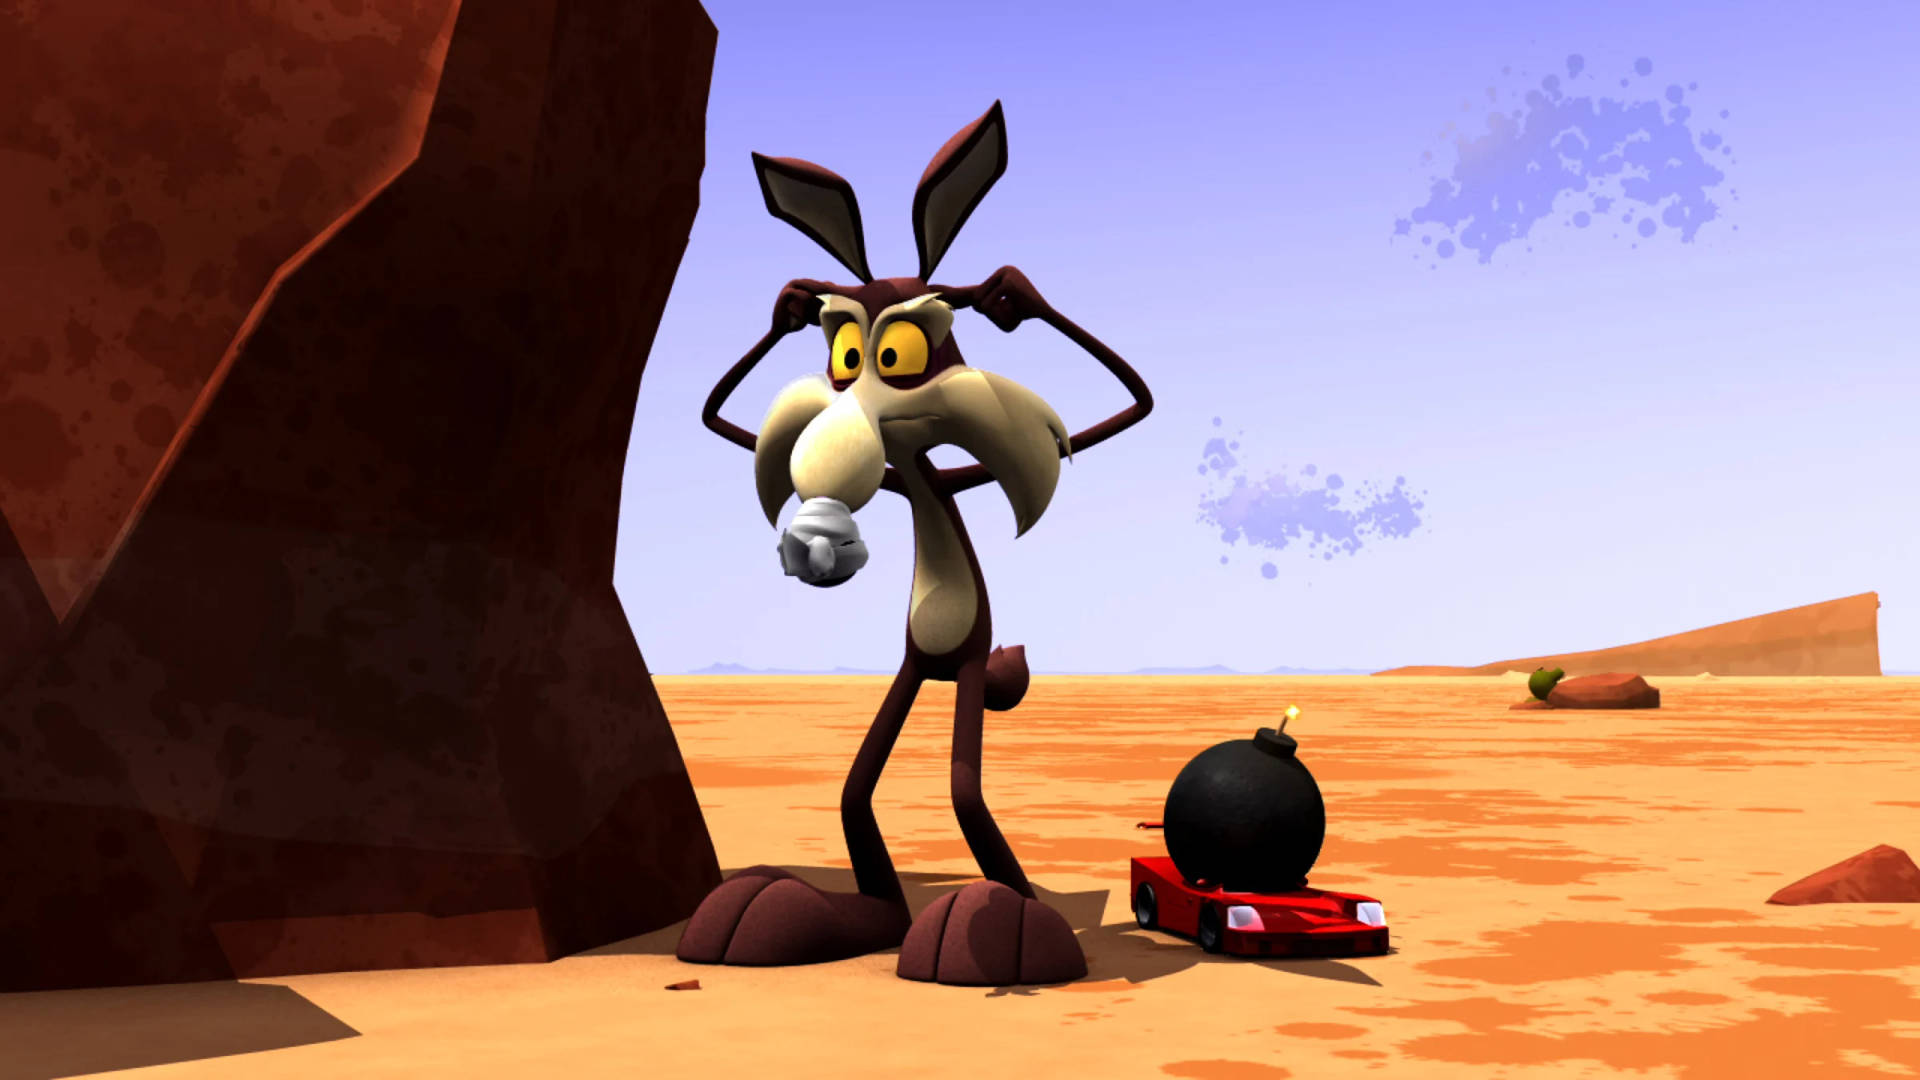 Wile E Coyote With Bomb Background